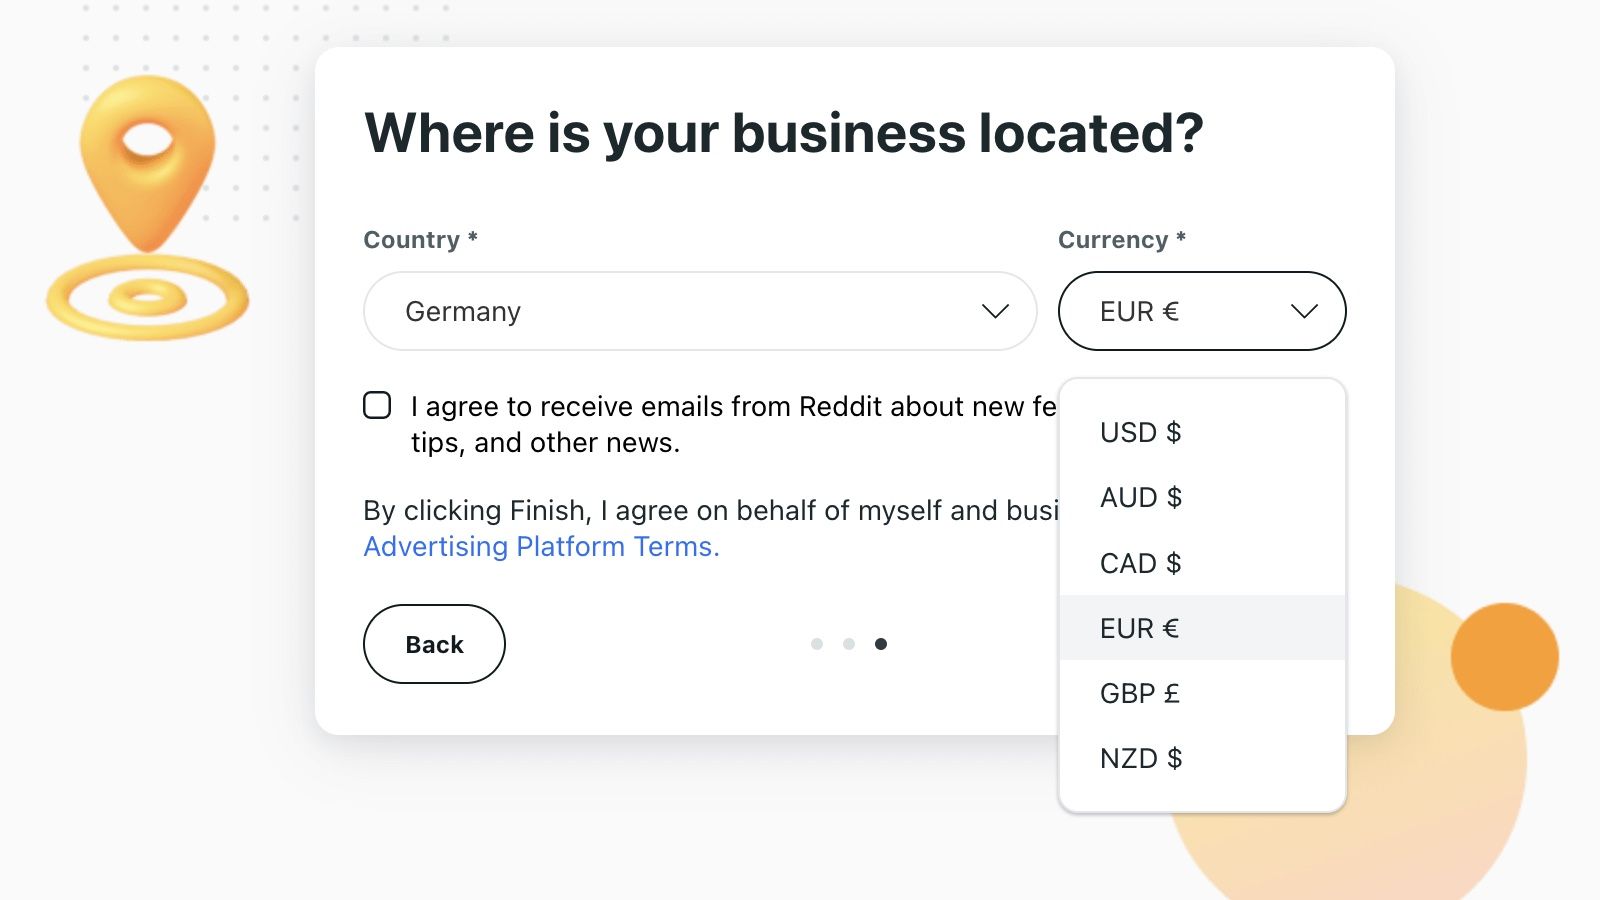 5 new currencies in Reddit Ads